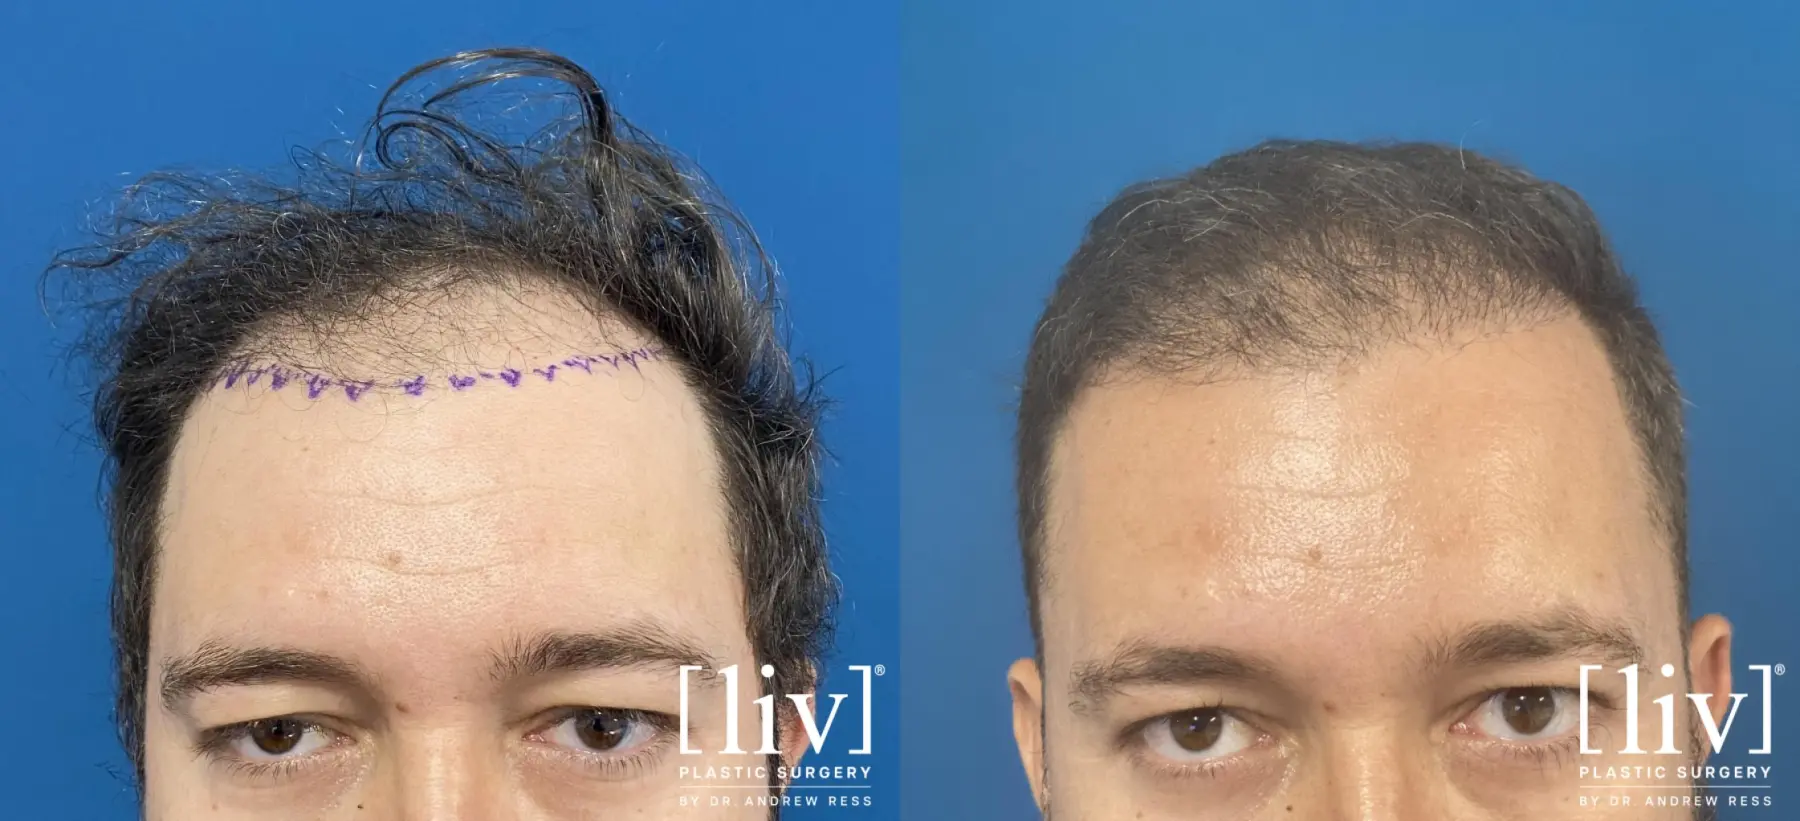 Hair Transplantation: Patient 9 - Before and After  